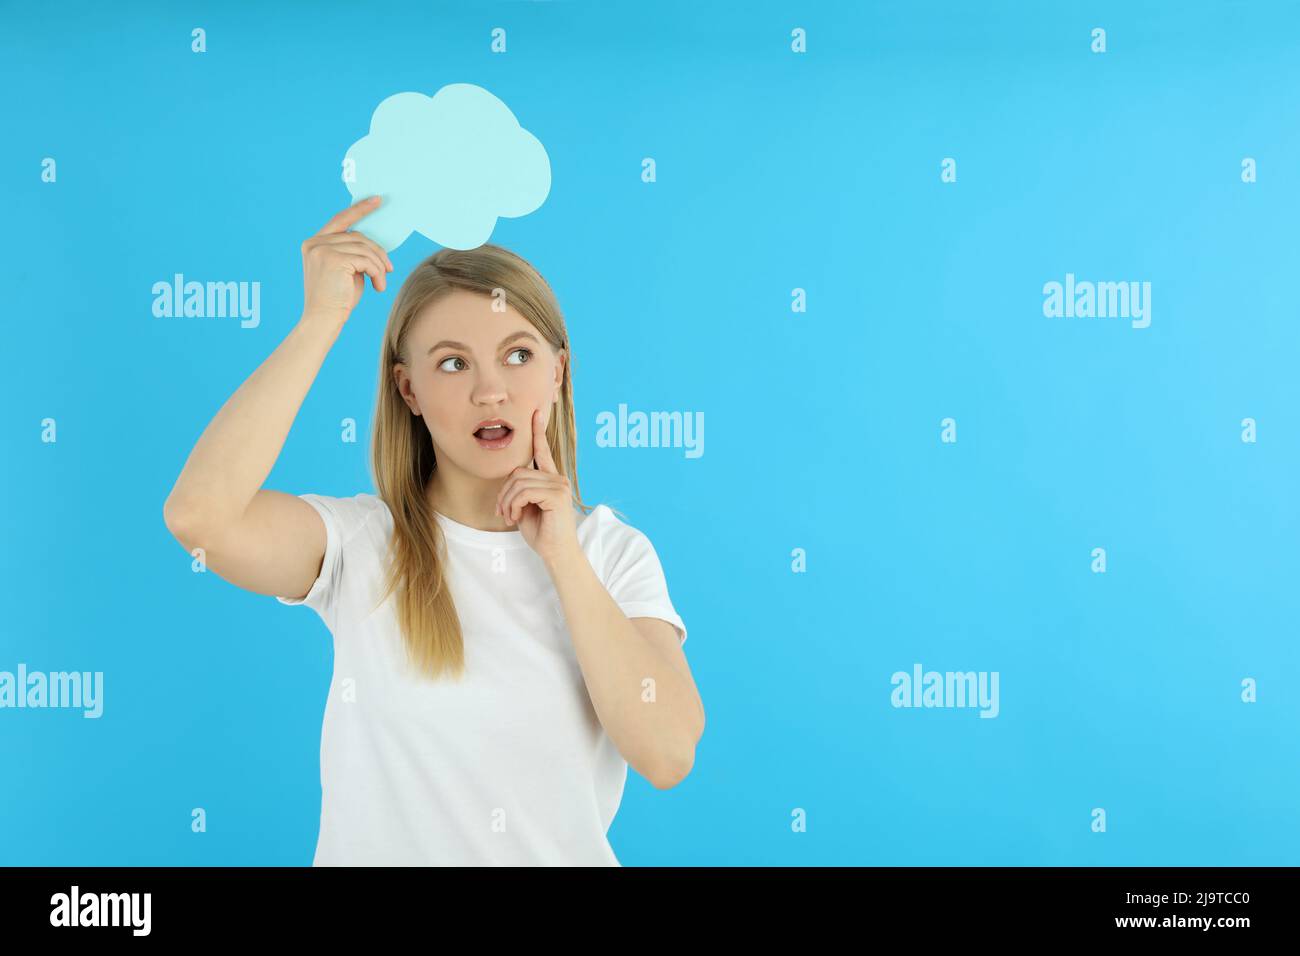 Young woman with speech bubble on blue background Stock Photo